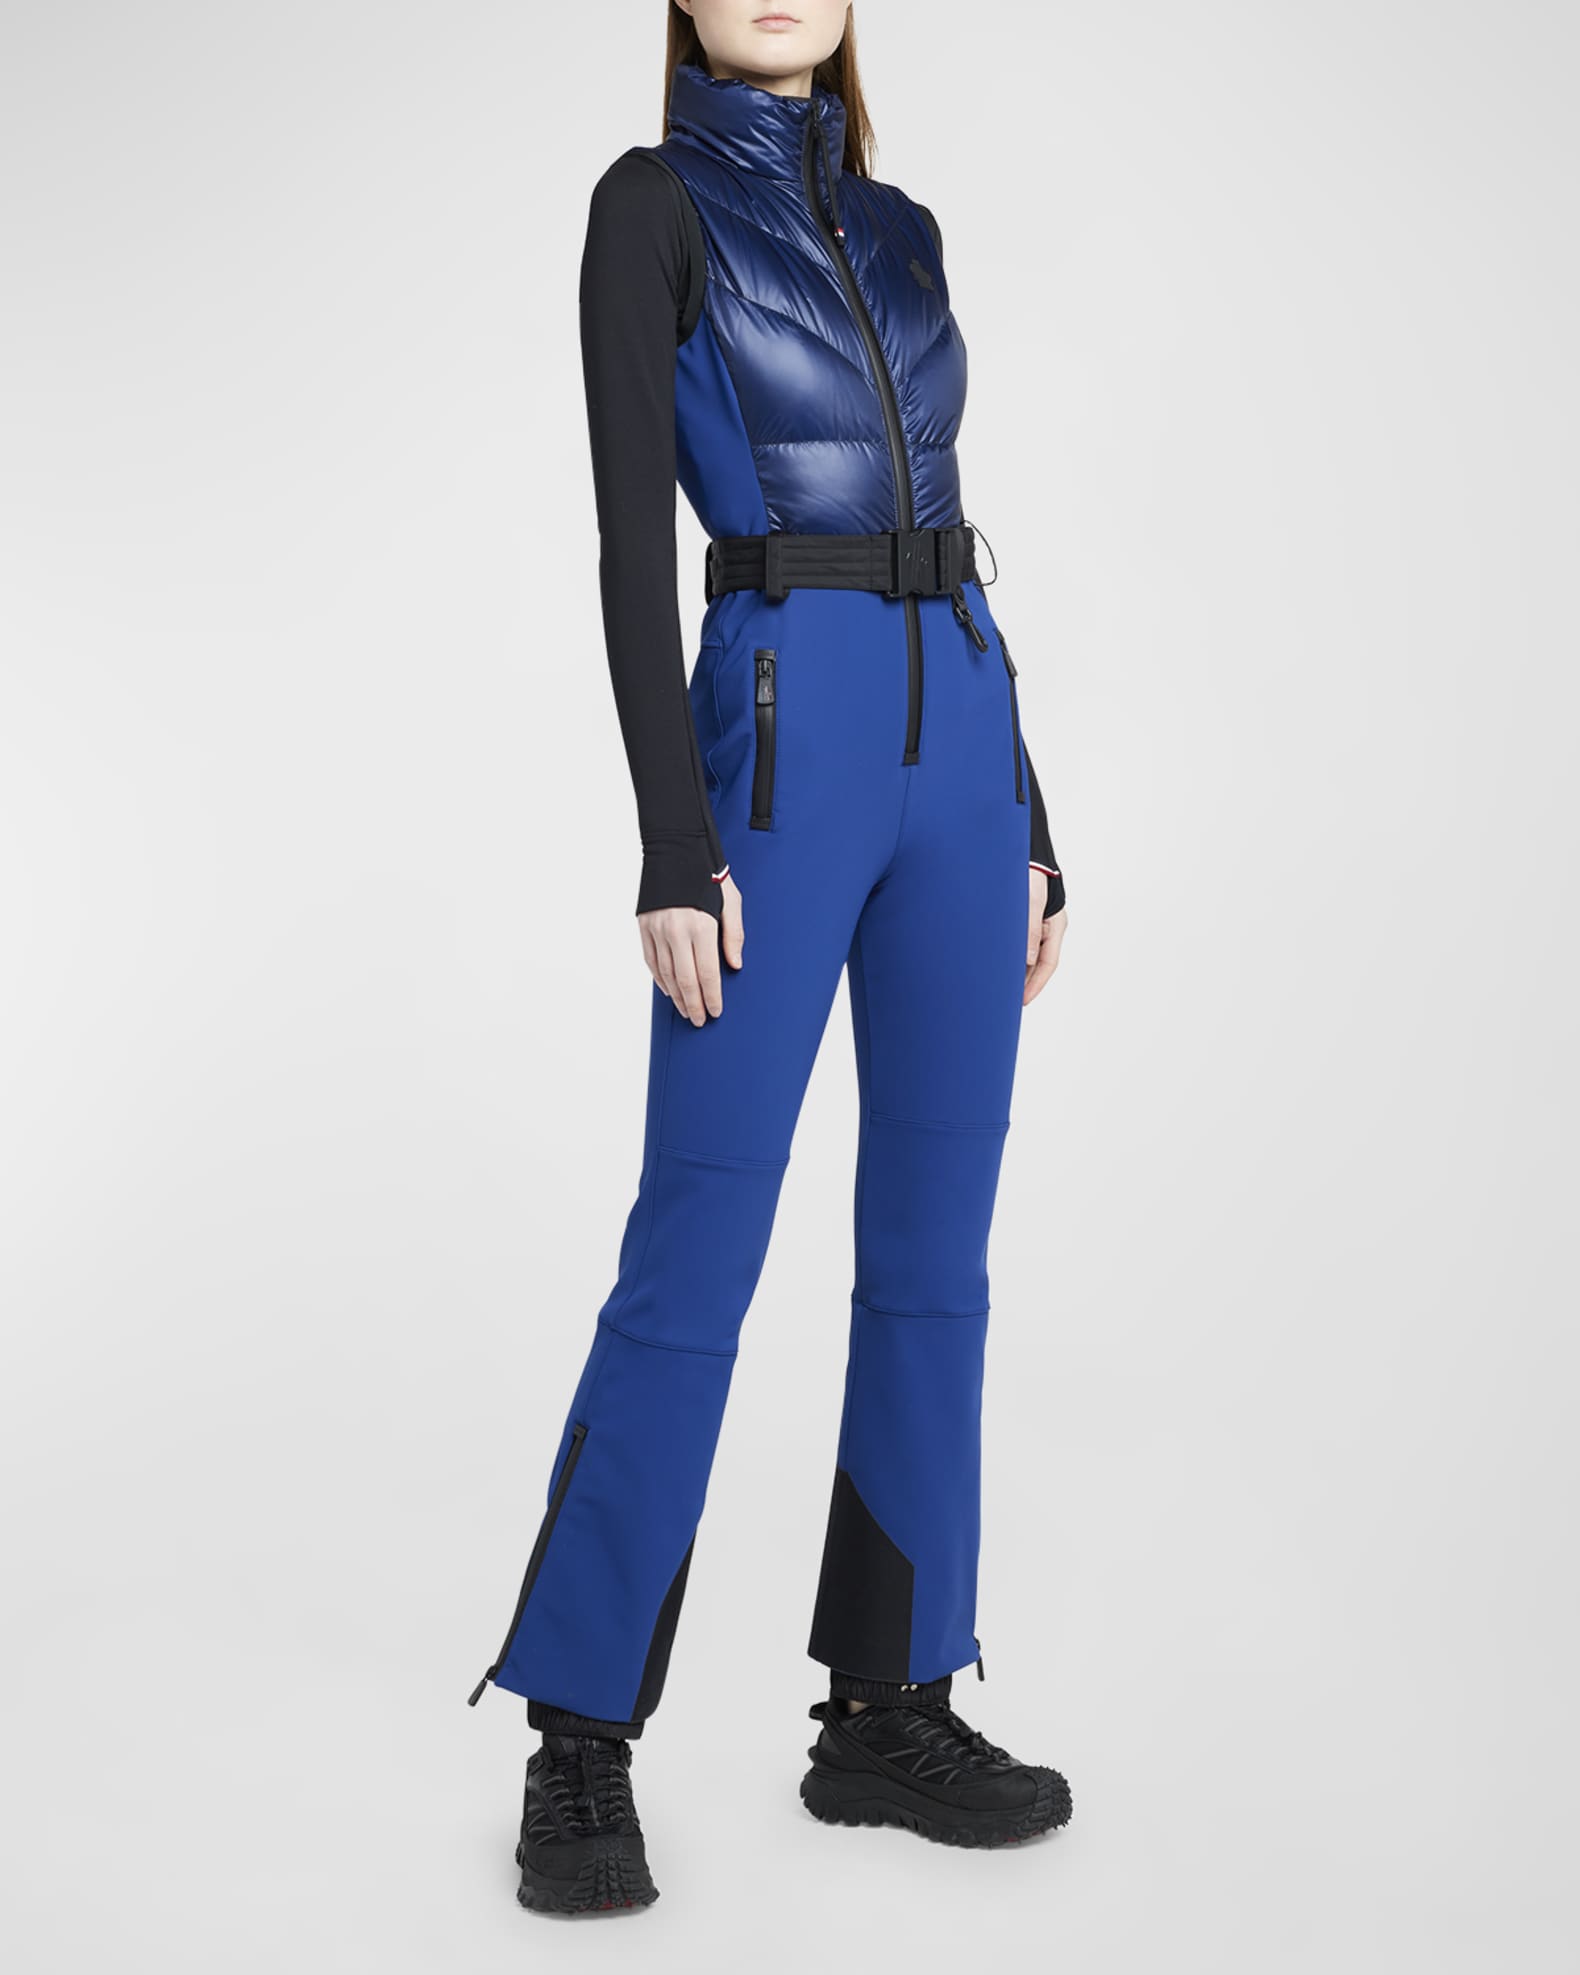 Moncler Grenoble All-In-One Puffer Jumpsuit | Neiman Marcus